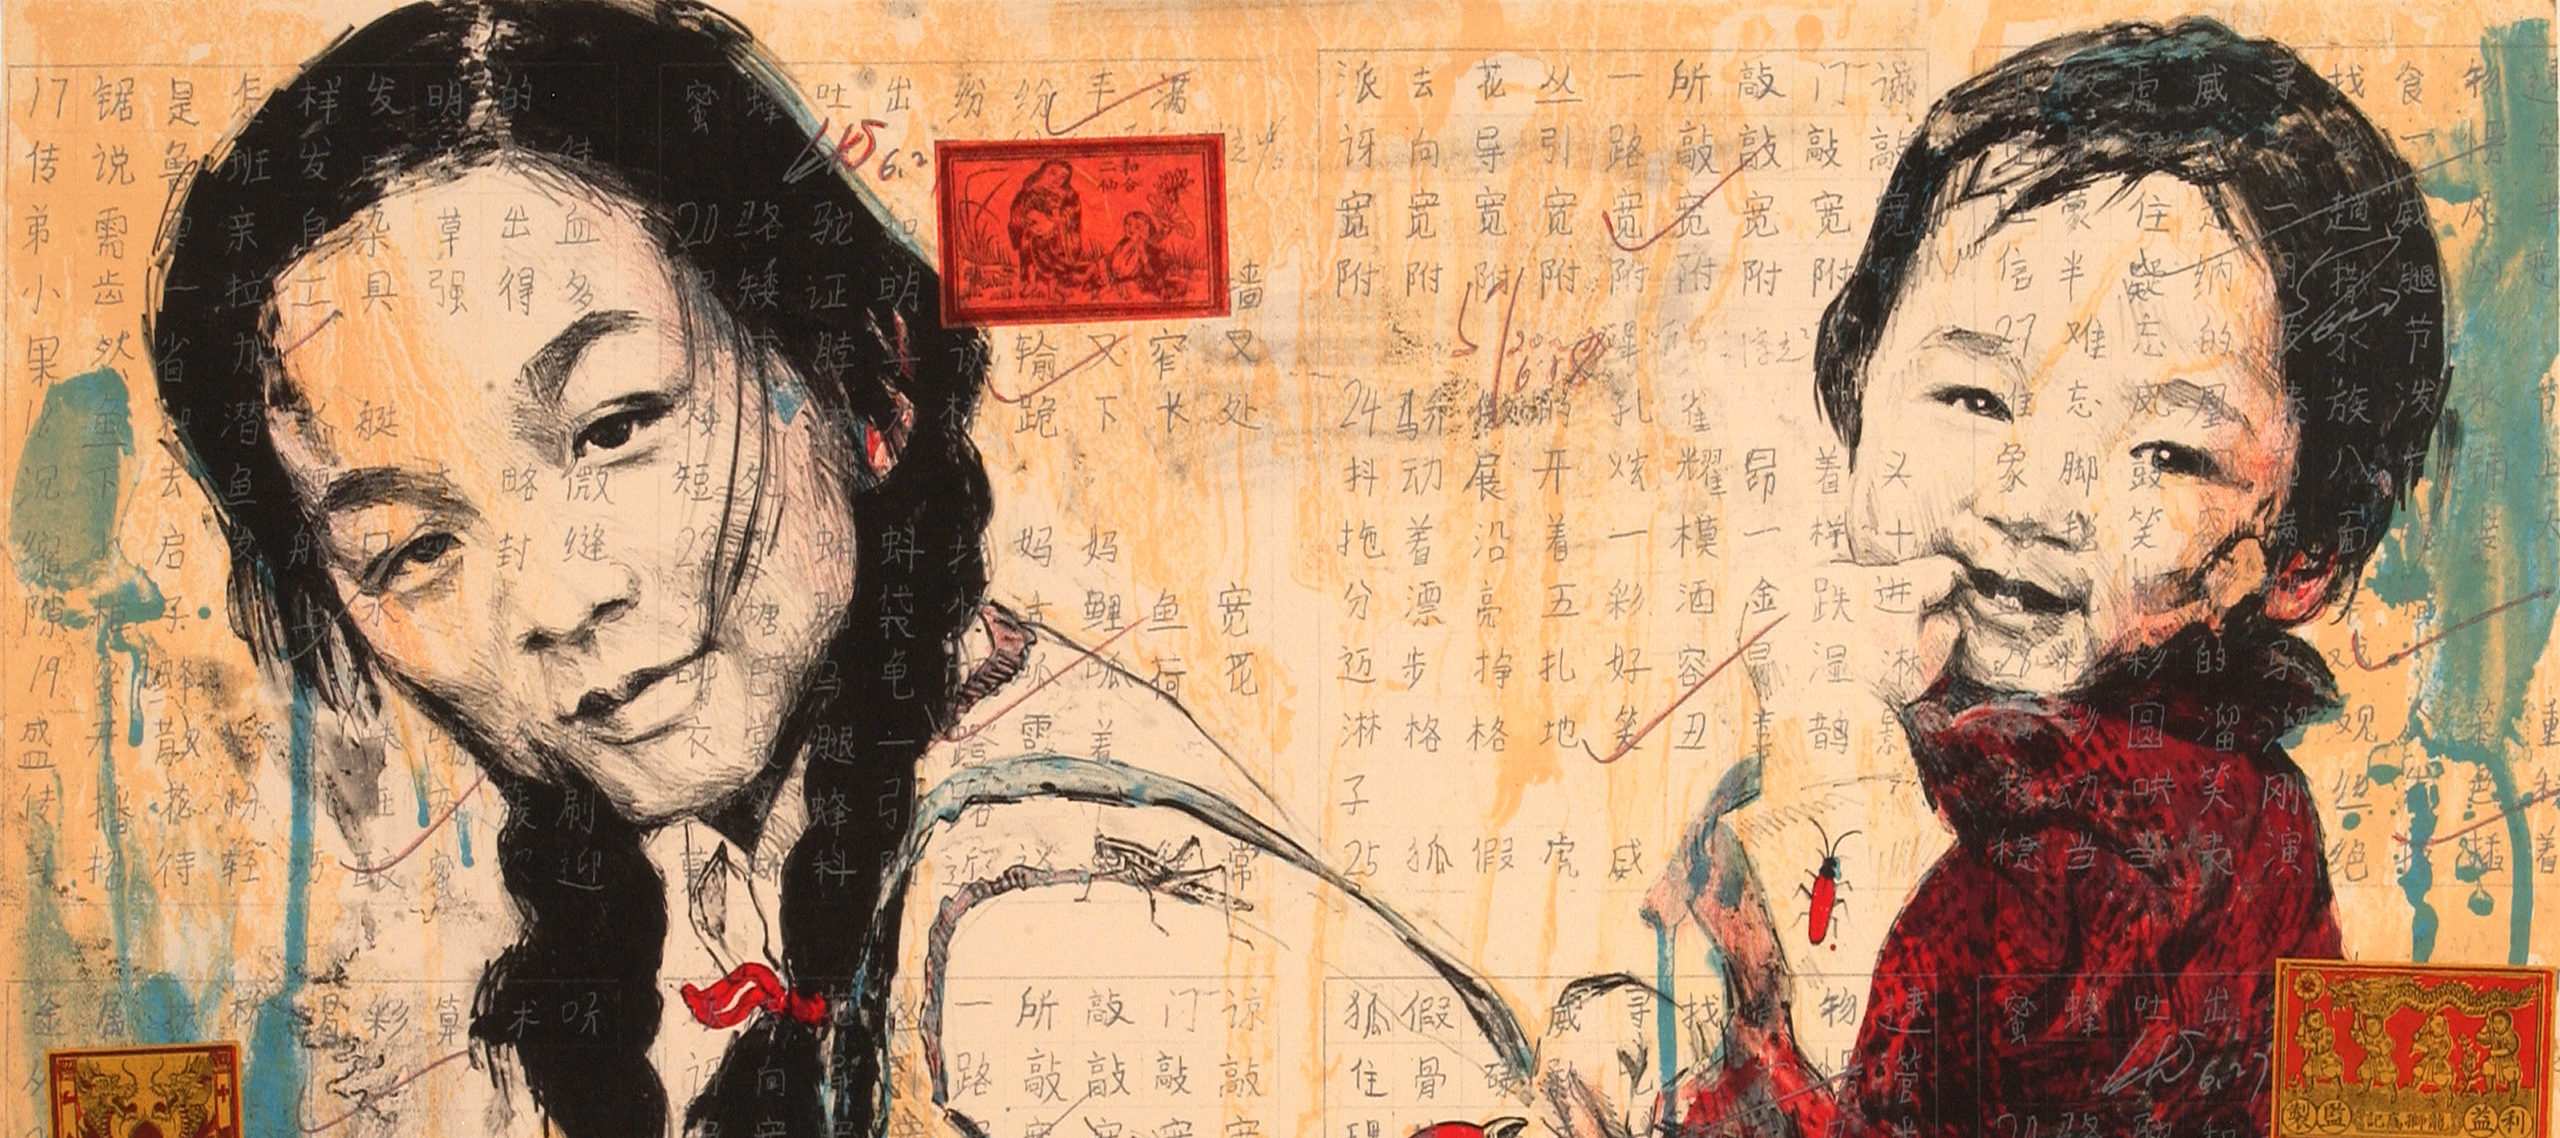 Two smiling Chinese girls with light skin and black hair painted on a collage of Chinese writing, small red envelopes, a red bird and bug, and blue paint drippings. The older girl, seen waist up, wears her hair in two braids and carries the younger girl in crimson clothes on her back.